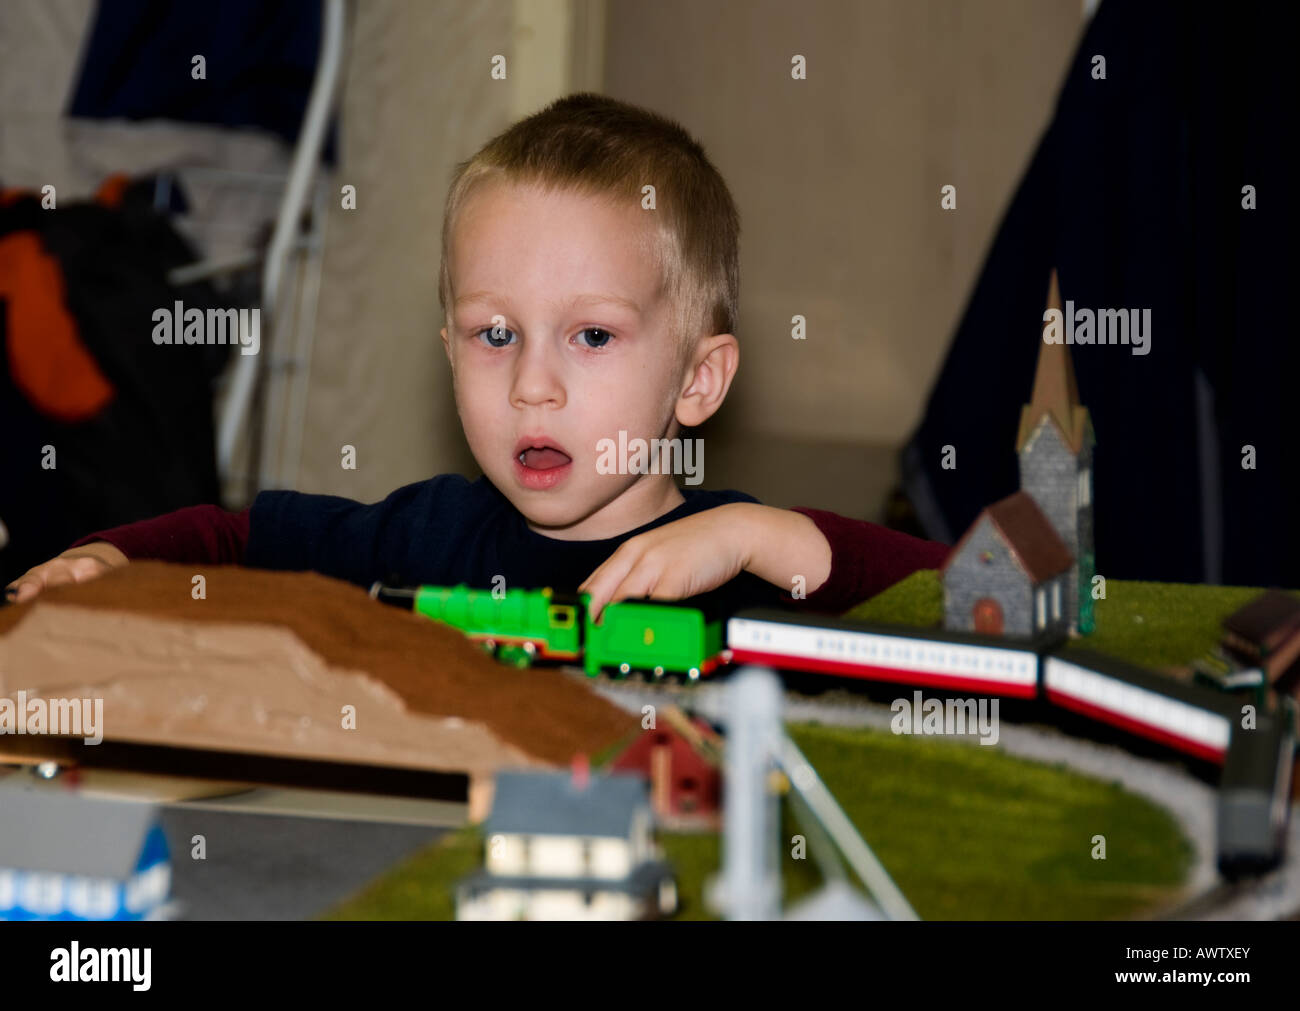 A three year old boy and electric train. Stock Photo